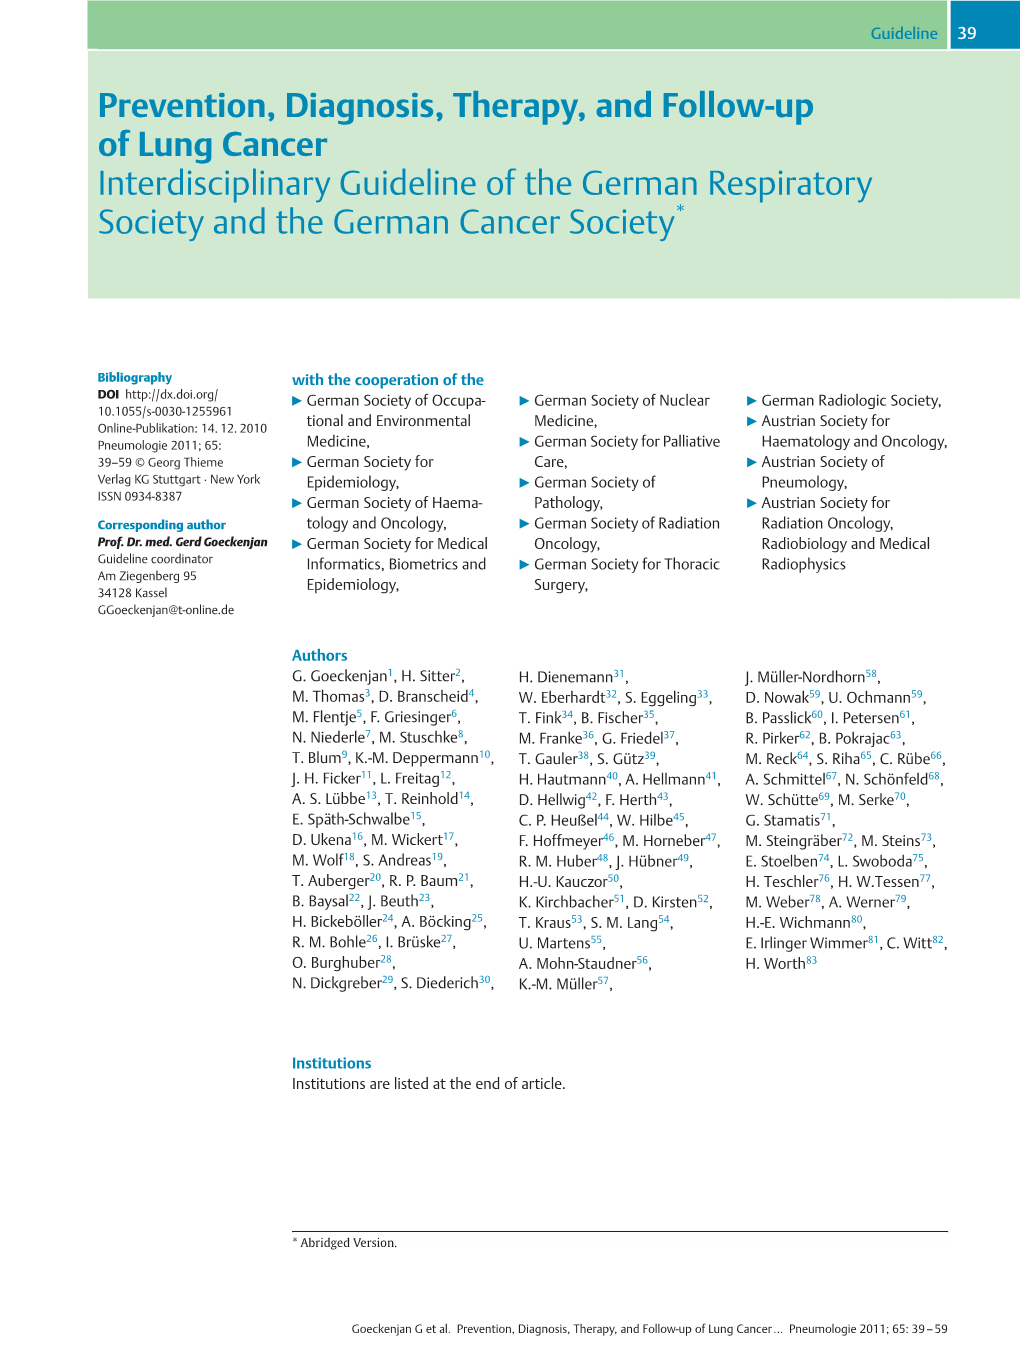 Prevention, Diagnosis, Therapy, and Follow-Up of Lung Cancer Interdisciplinary Guideline of the German Respiratory Society and the German Cancer Society*